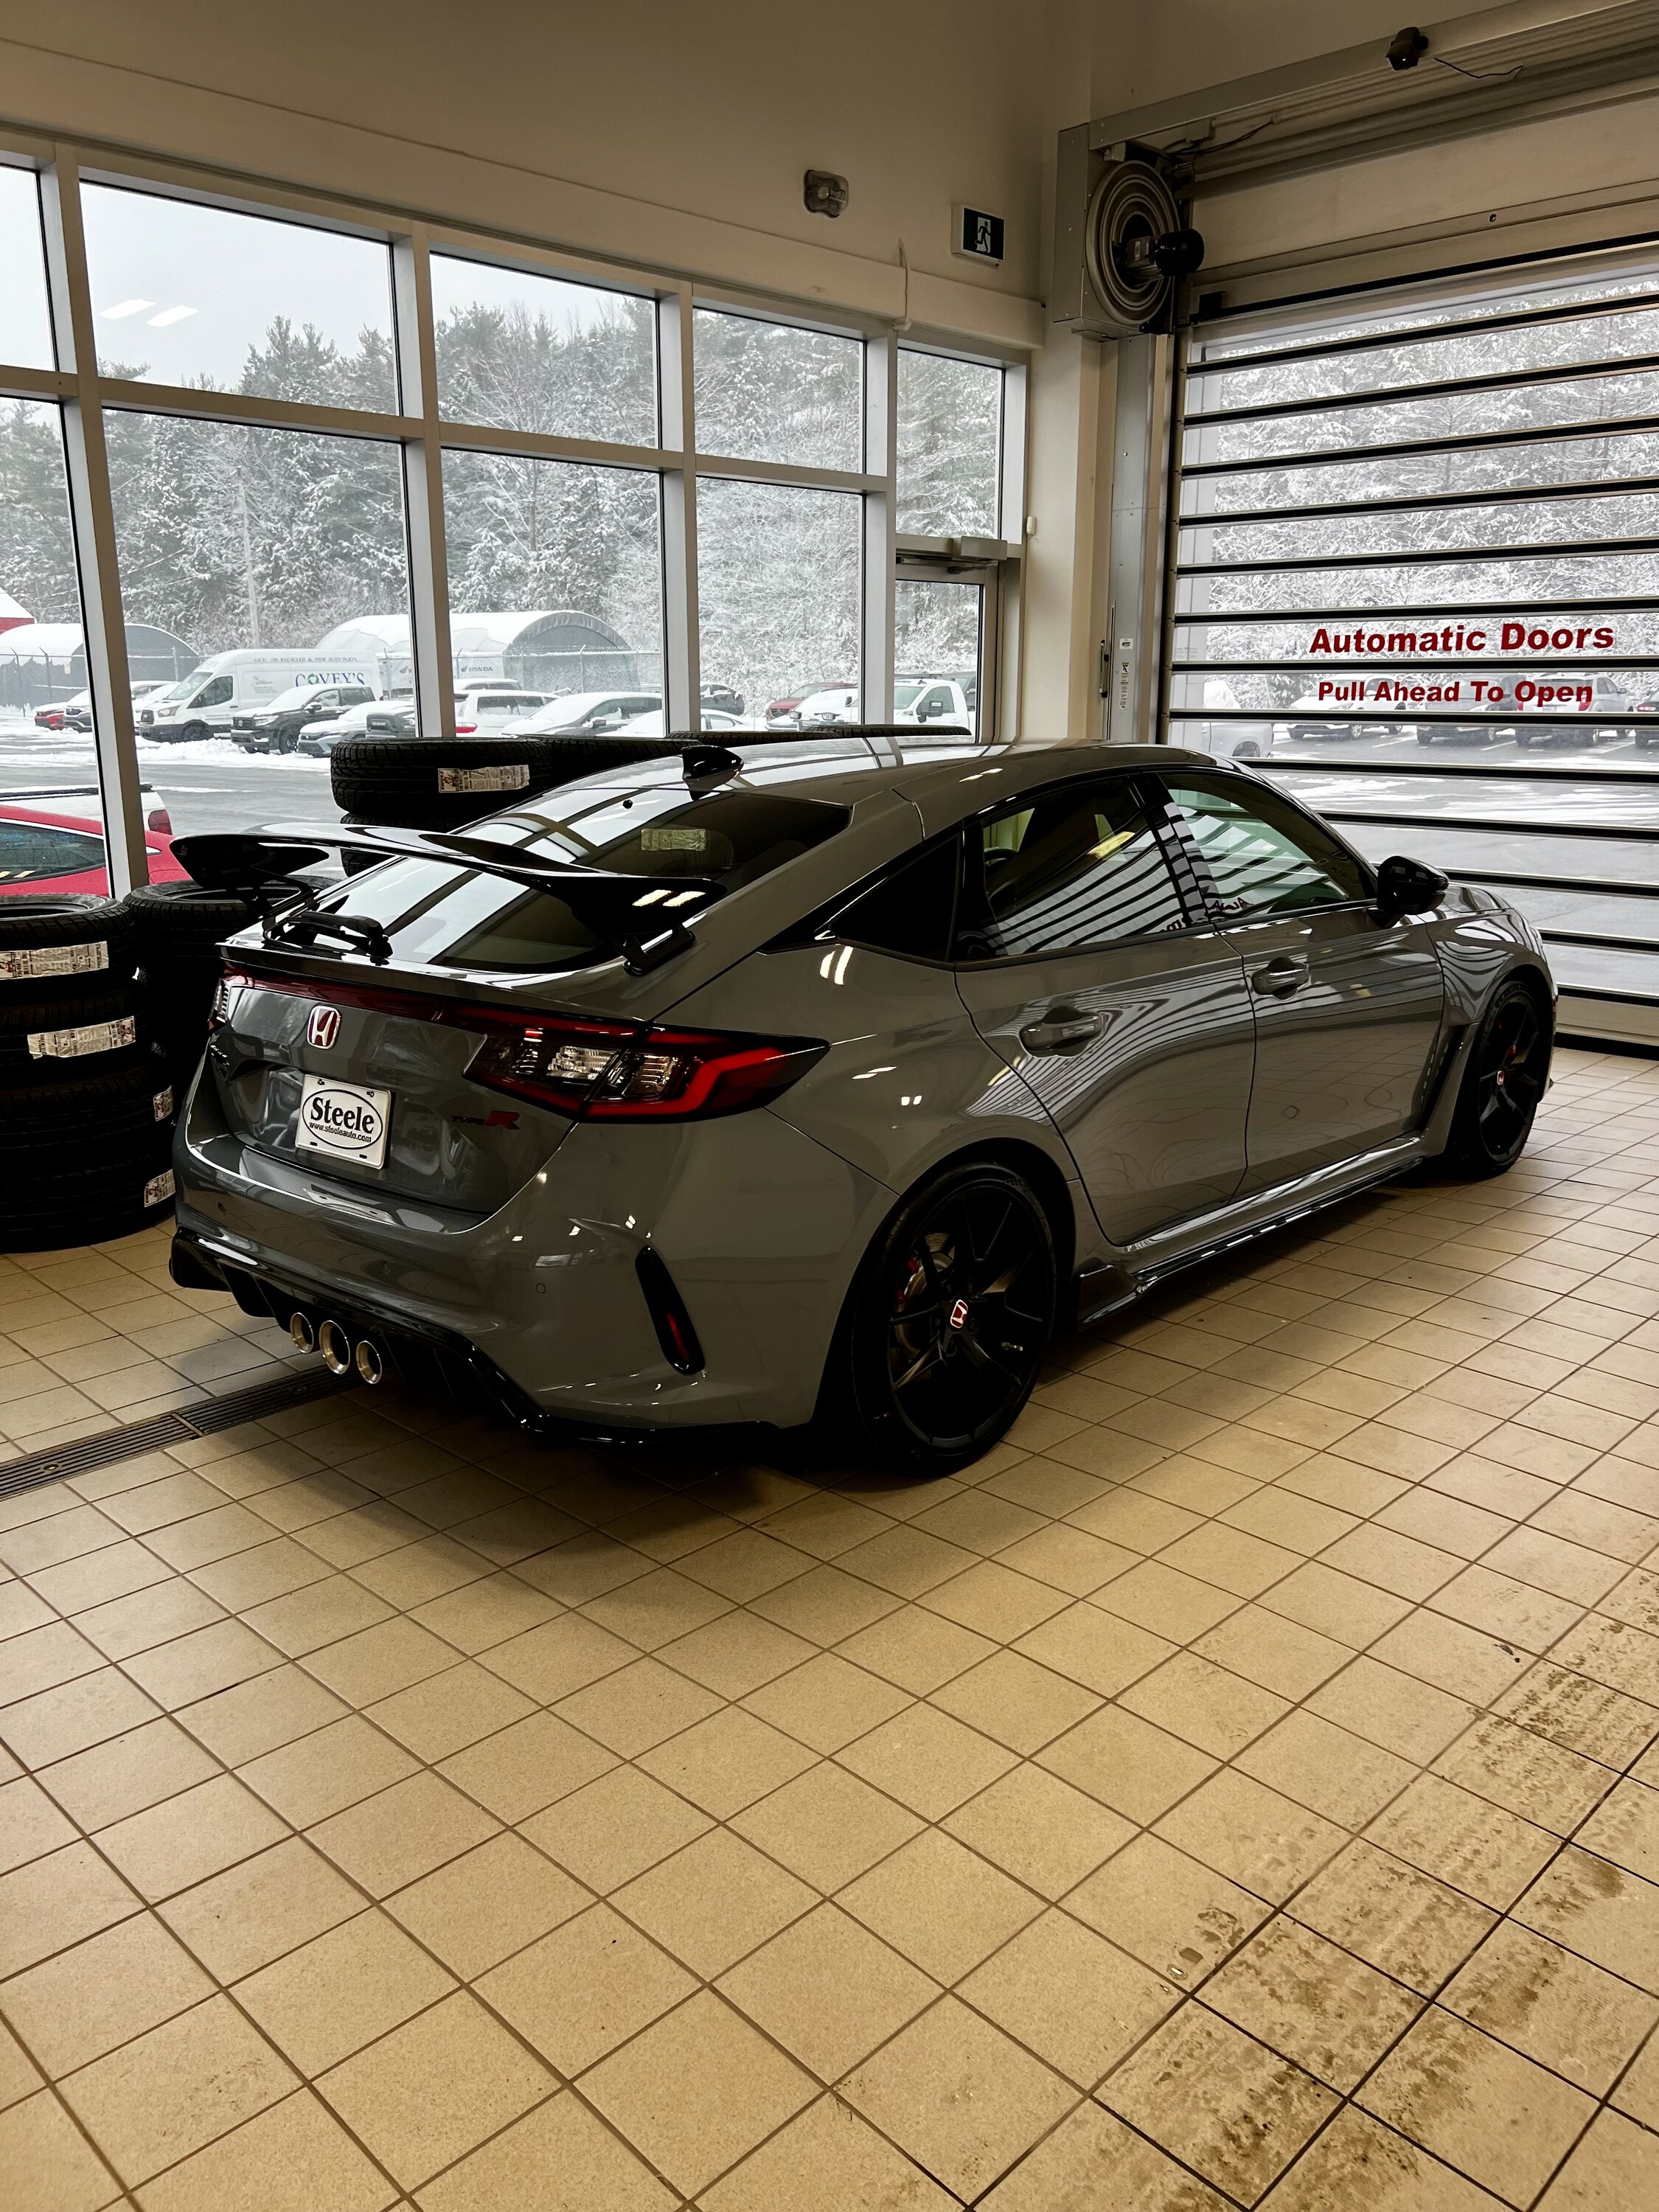 11th Gen Honda Civic Canadian dealer asked what colour Type R I want IMG_5699